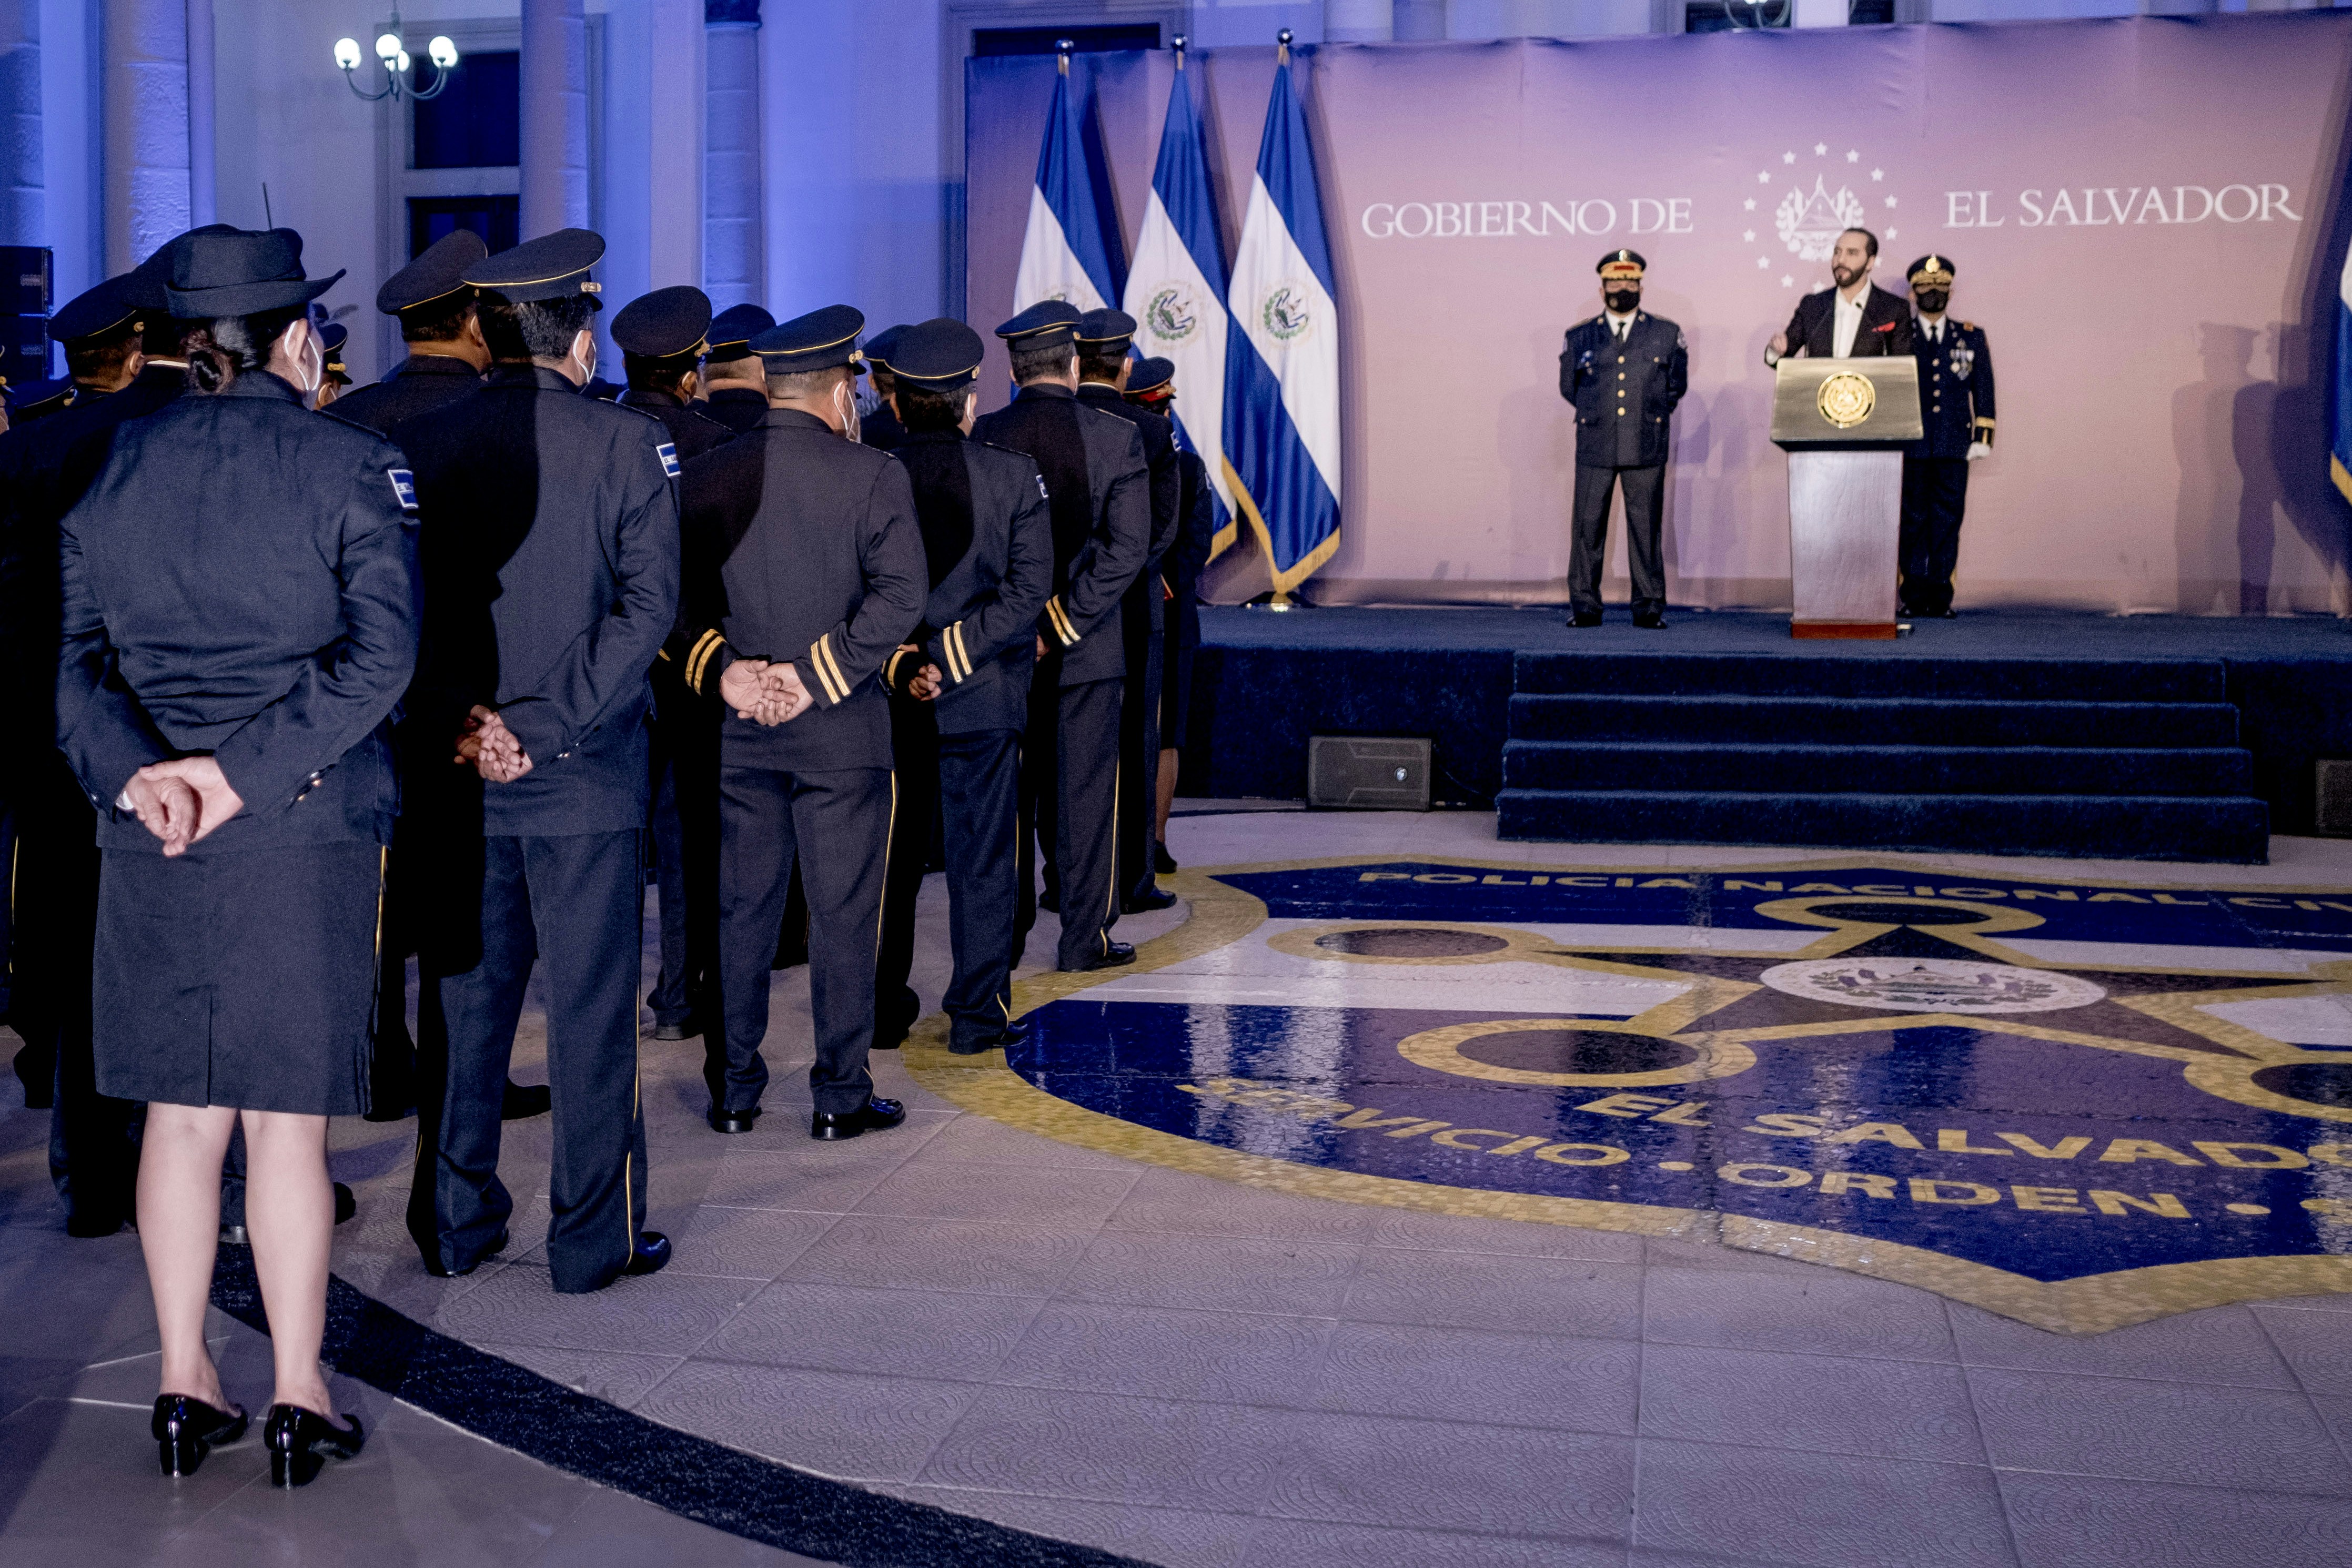 El Salvador’s president Nayib Bukele speaks during a graduation ceremony of inspectors of the National Police in San Salvador, El Salvador on May 20, 2021. Fred Ramos for The Intercept.